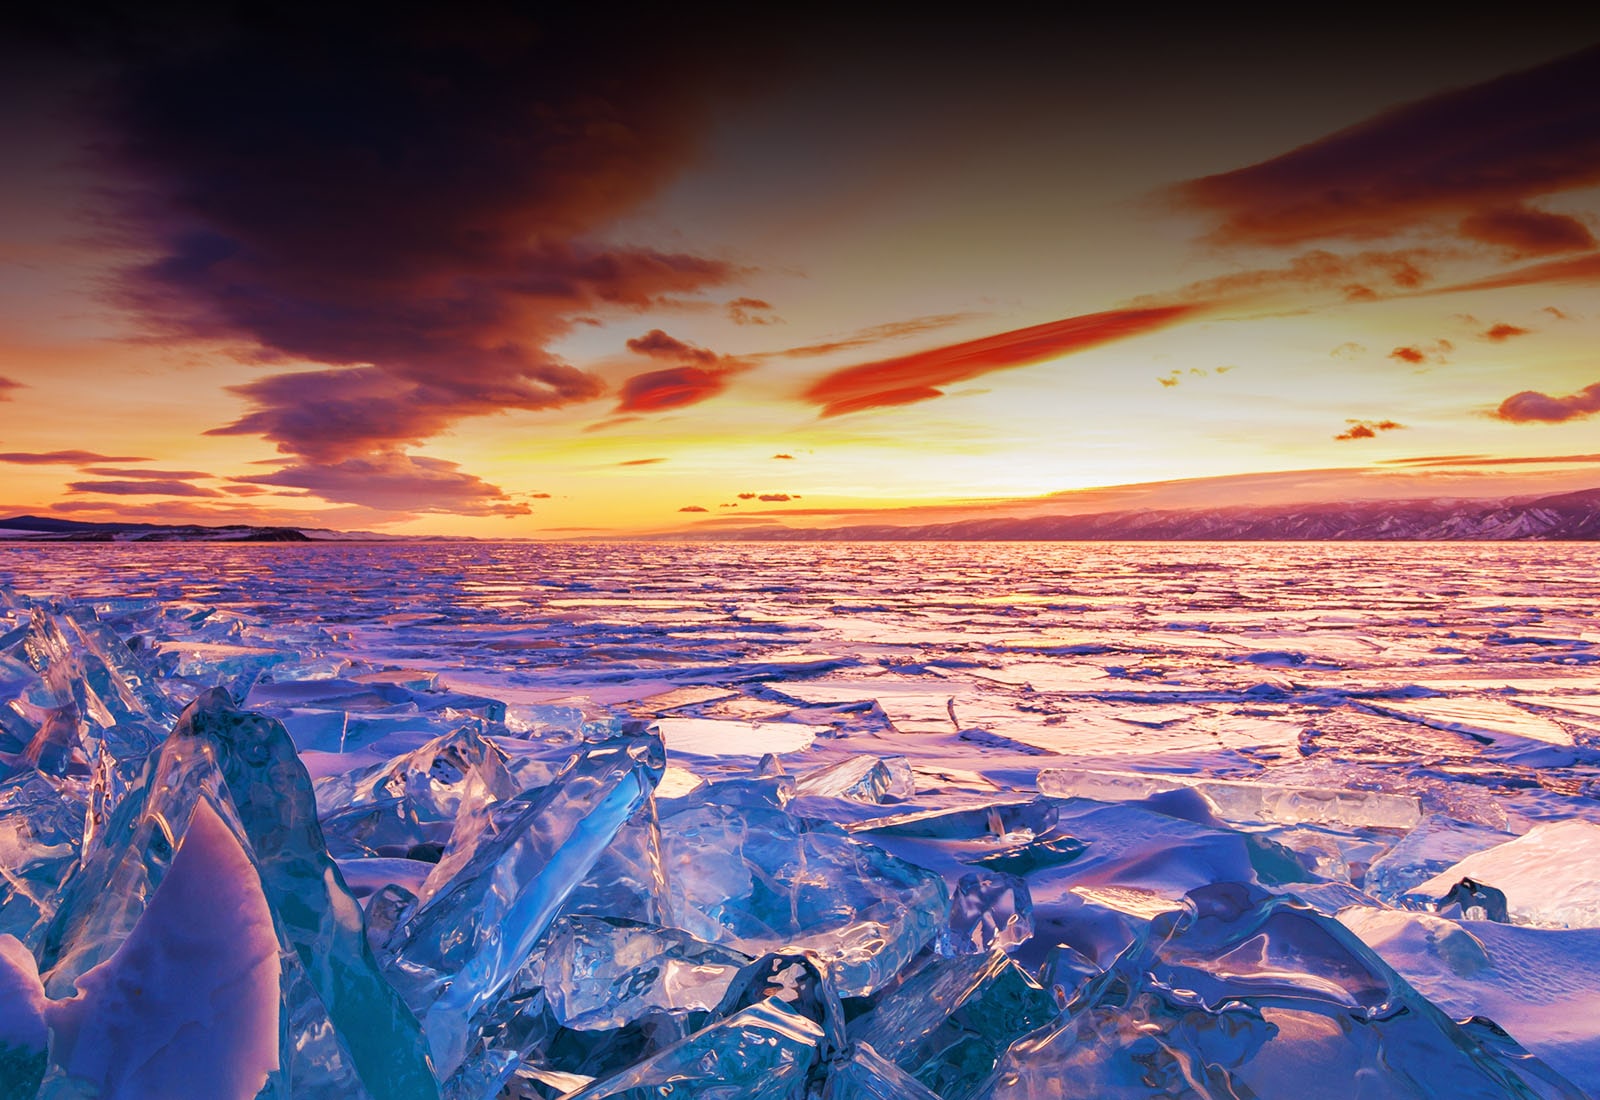 A vivid depiction of the sunset and the glacier.